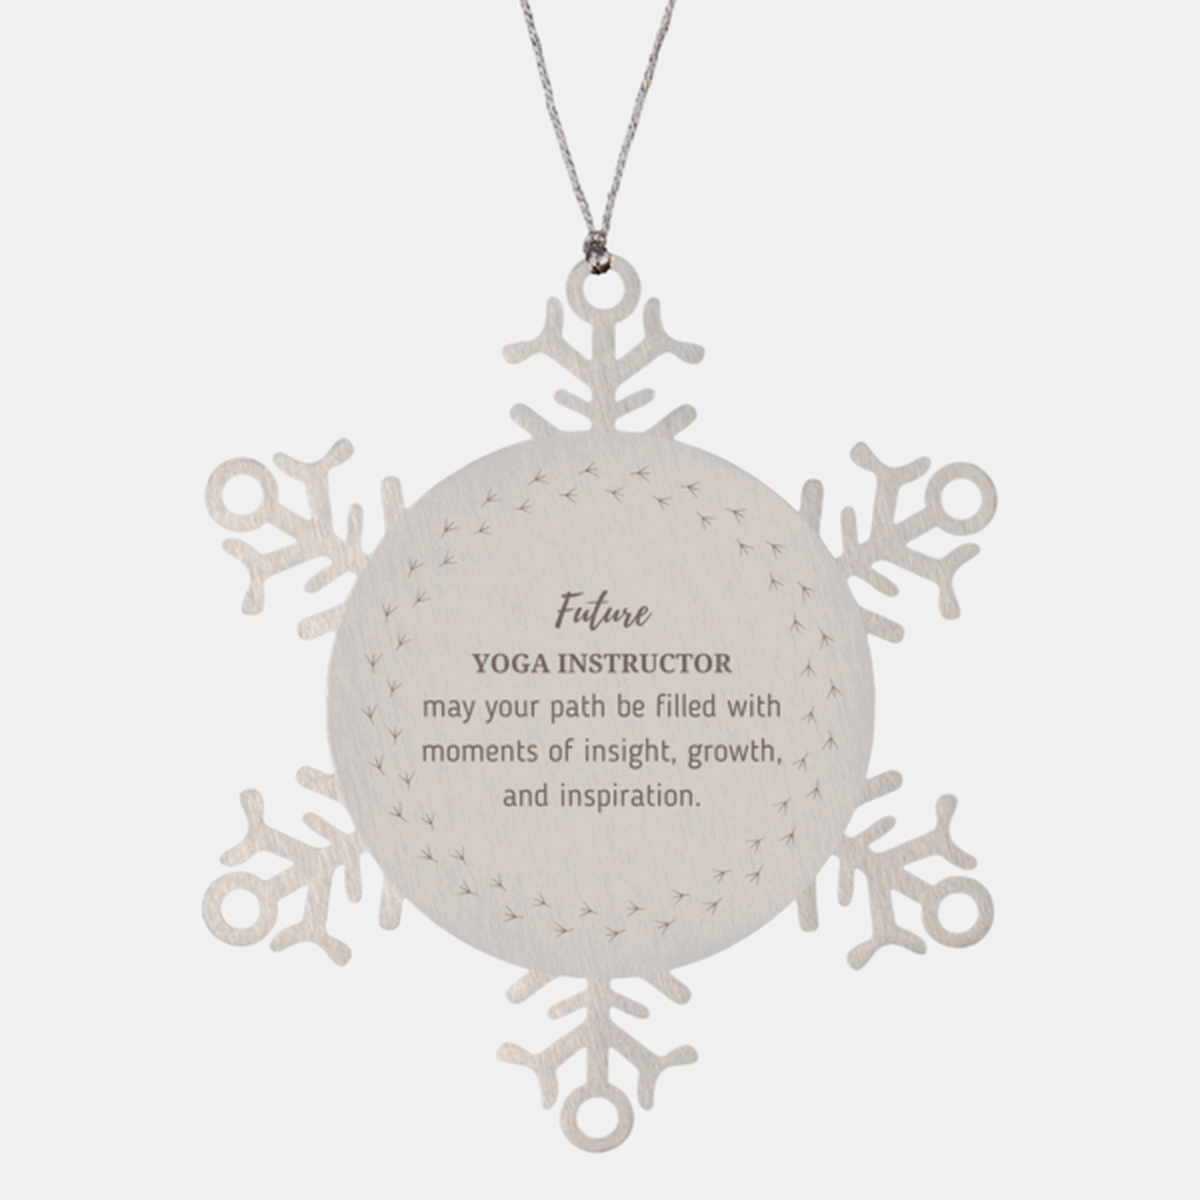 Future Yoga Instructor Gifts, May your path be filled with moments of insight, Graduation Gifts for New Yoga Instructor, Christmas Unique Snowflake Ornament For Men, Women, Friends